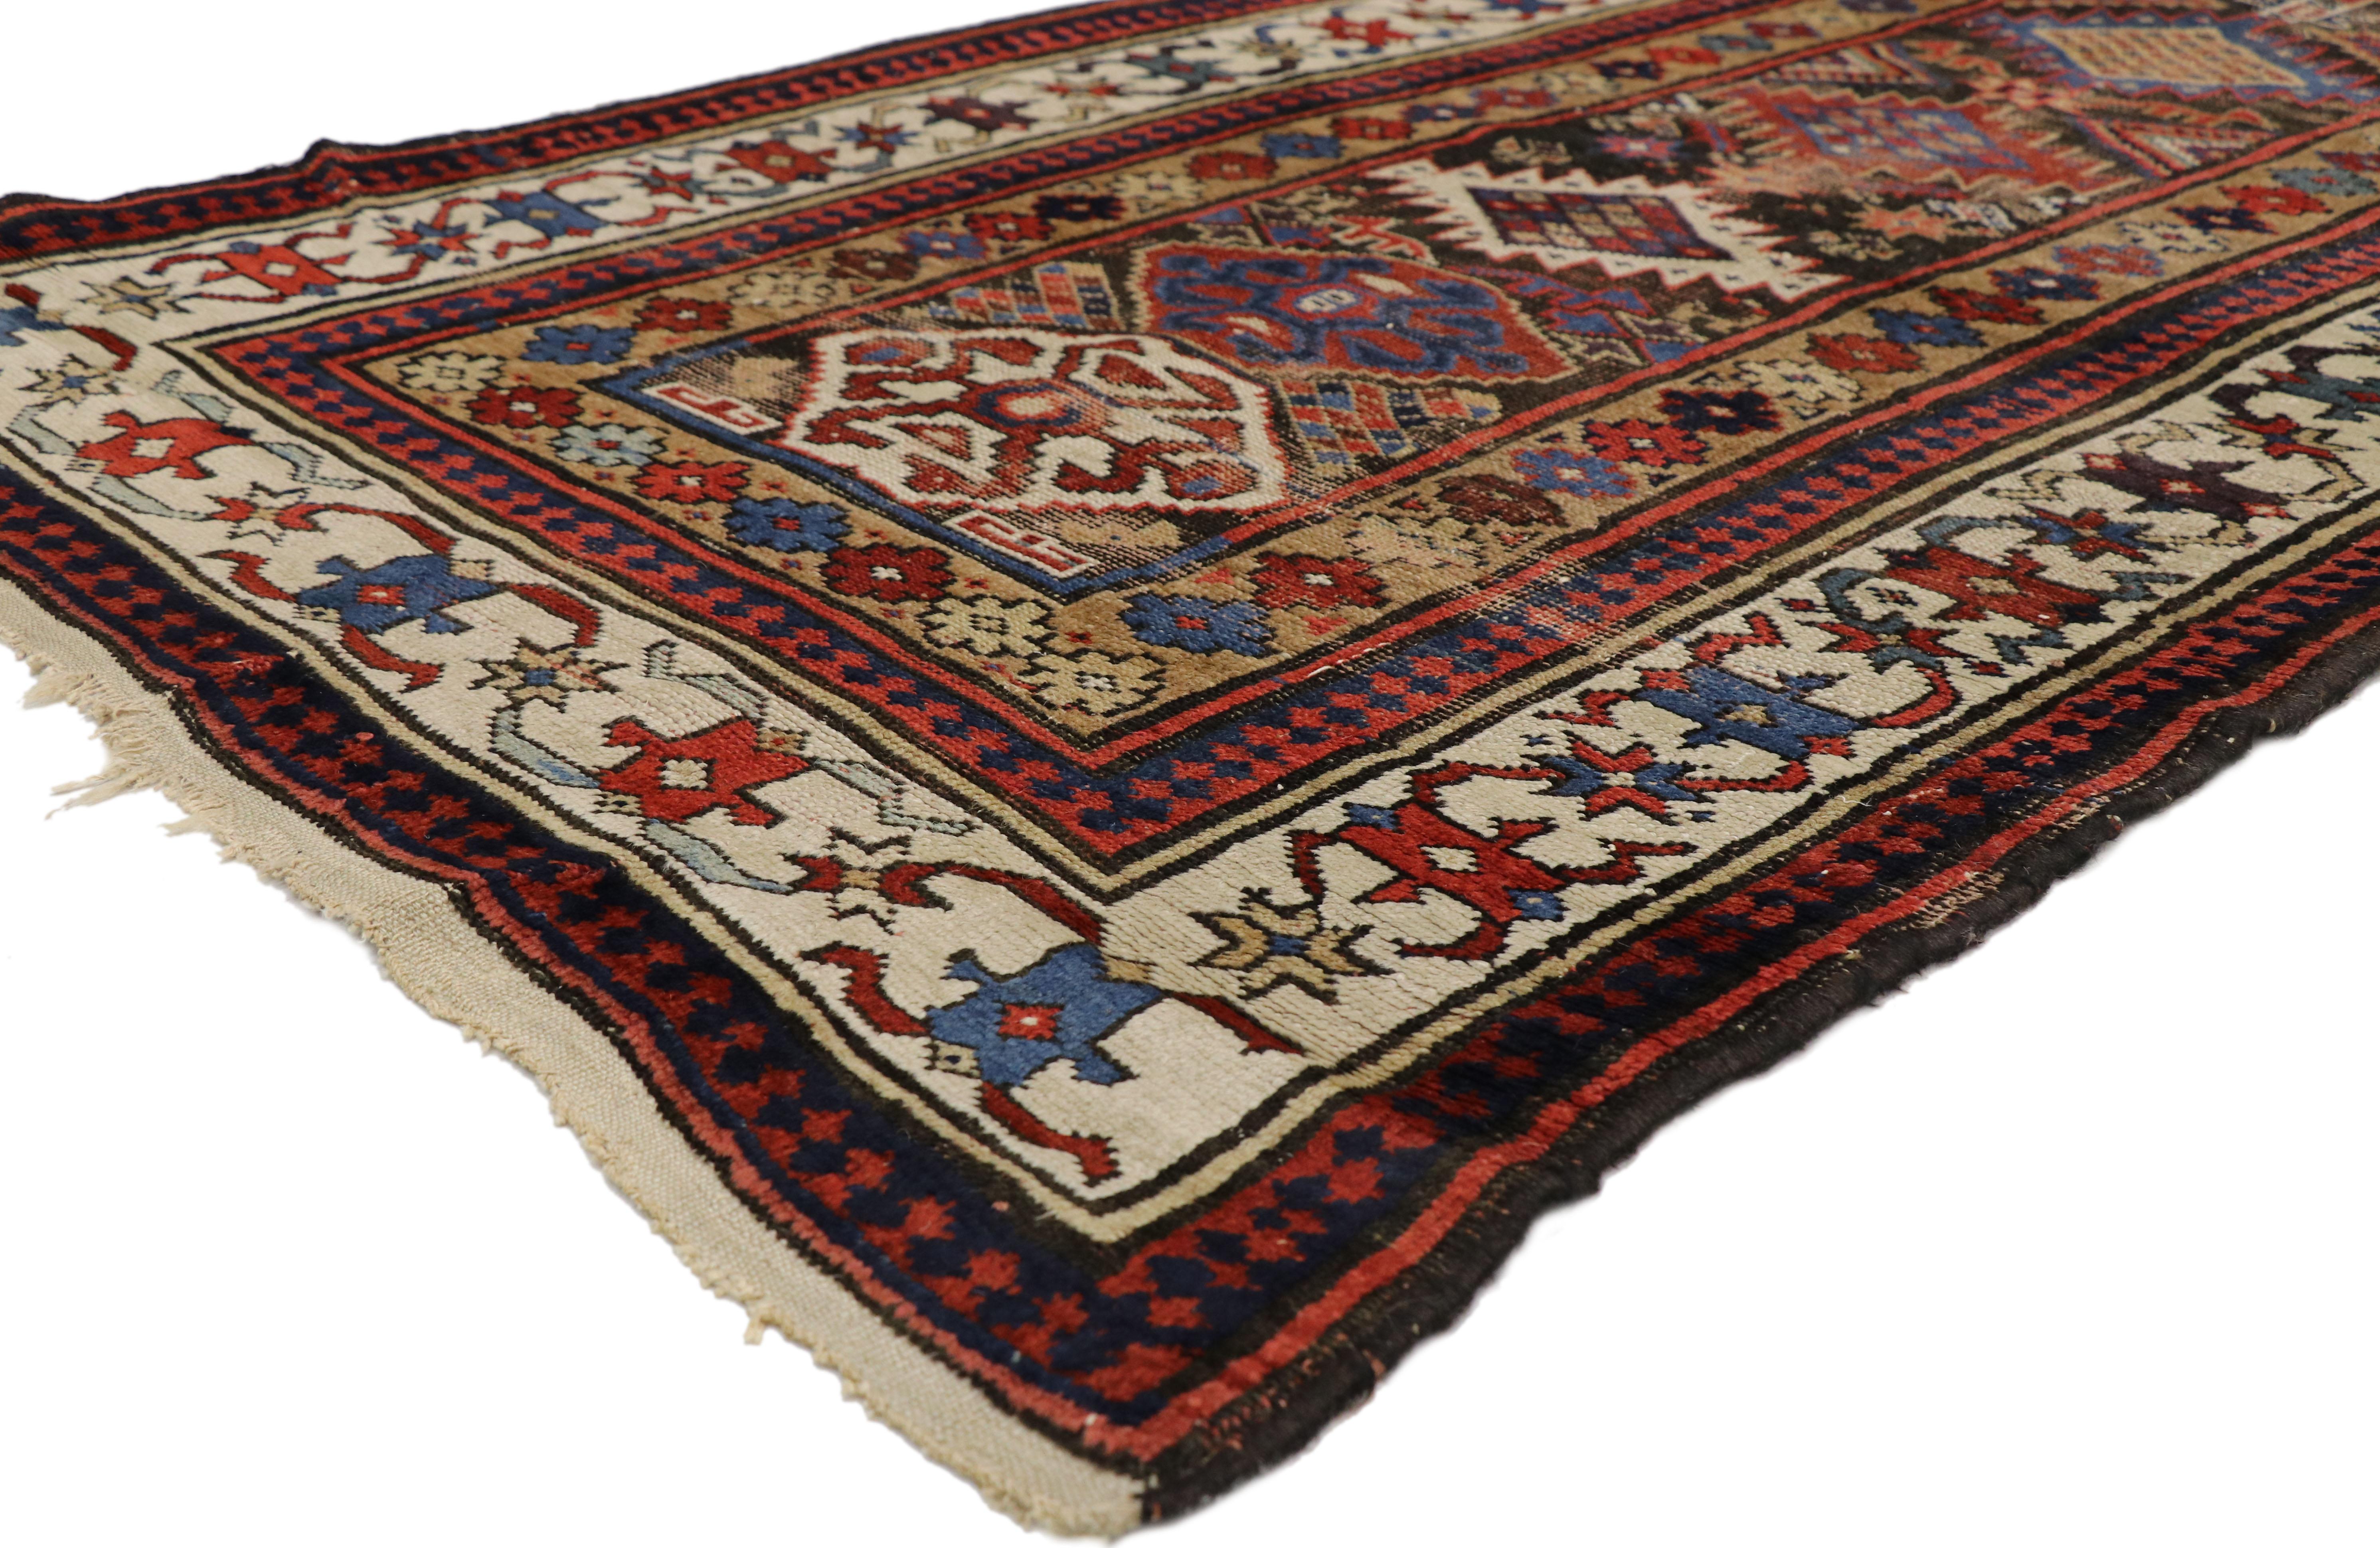 77059 Antique Caucasian Tribal Kazak Hallway Runner with Art Deco Tribal Style 03'06 x 11'06. Based on traditional designs from the Caucasus region, this hand-knotted wool antique Russian Kazak runner features an array of latch hook medallions